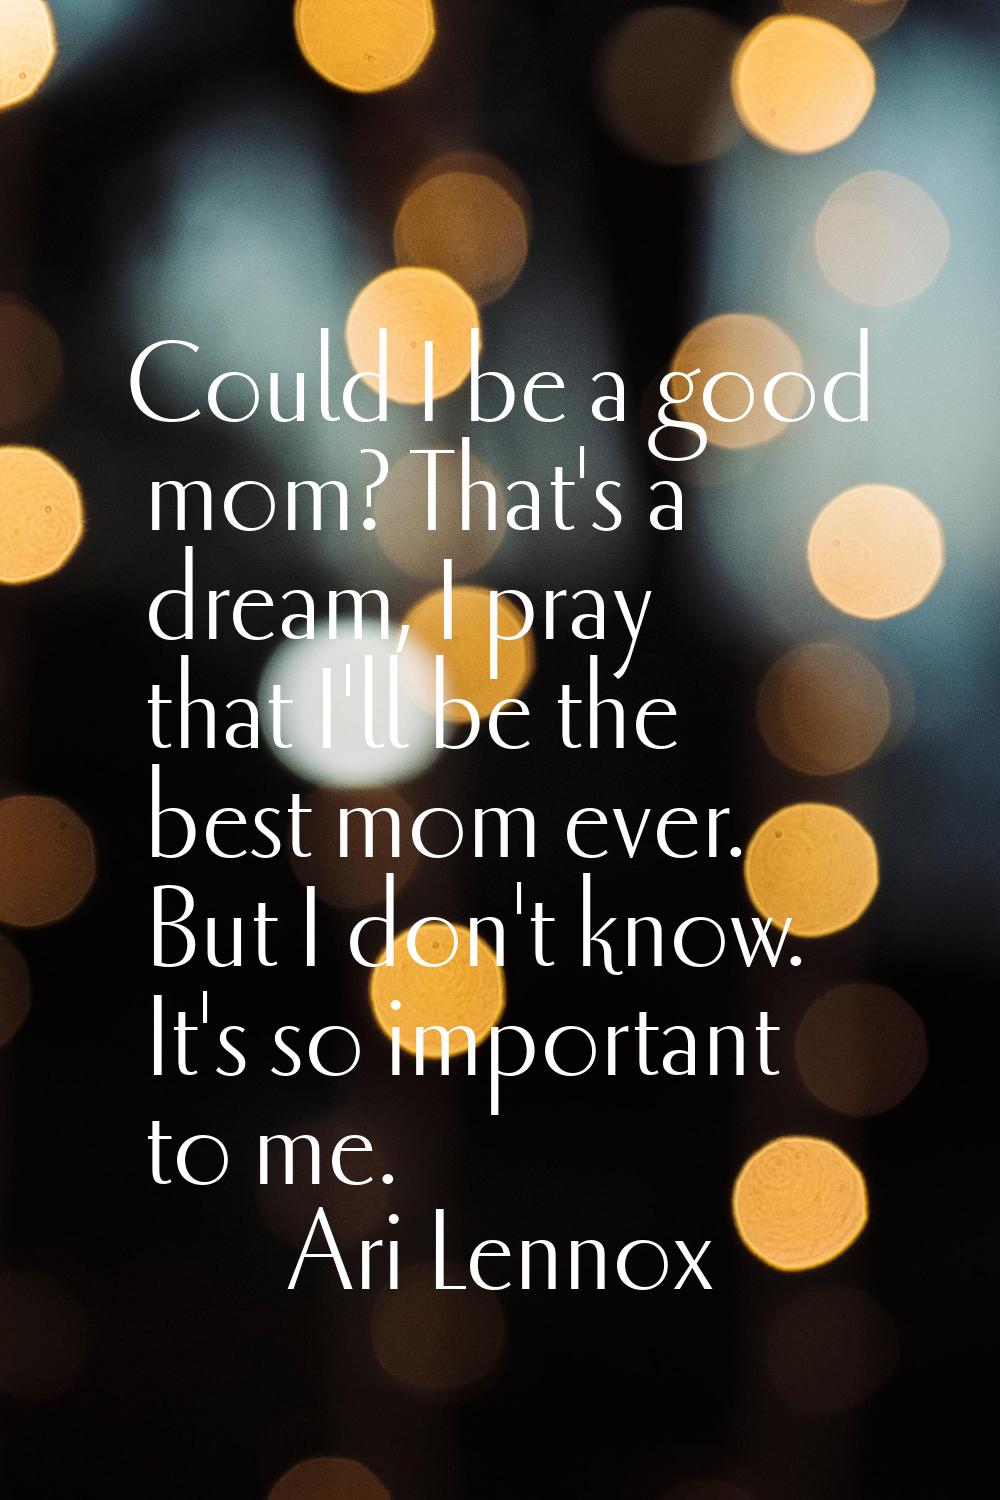 Could I be a good mom? That's a dream, I pray that I'll be the best mom ever. But I don't know. It'